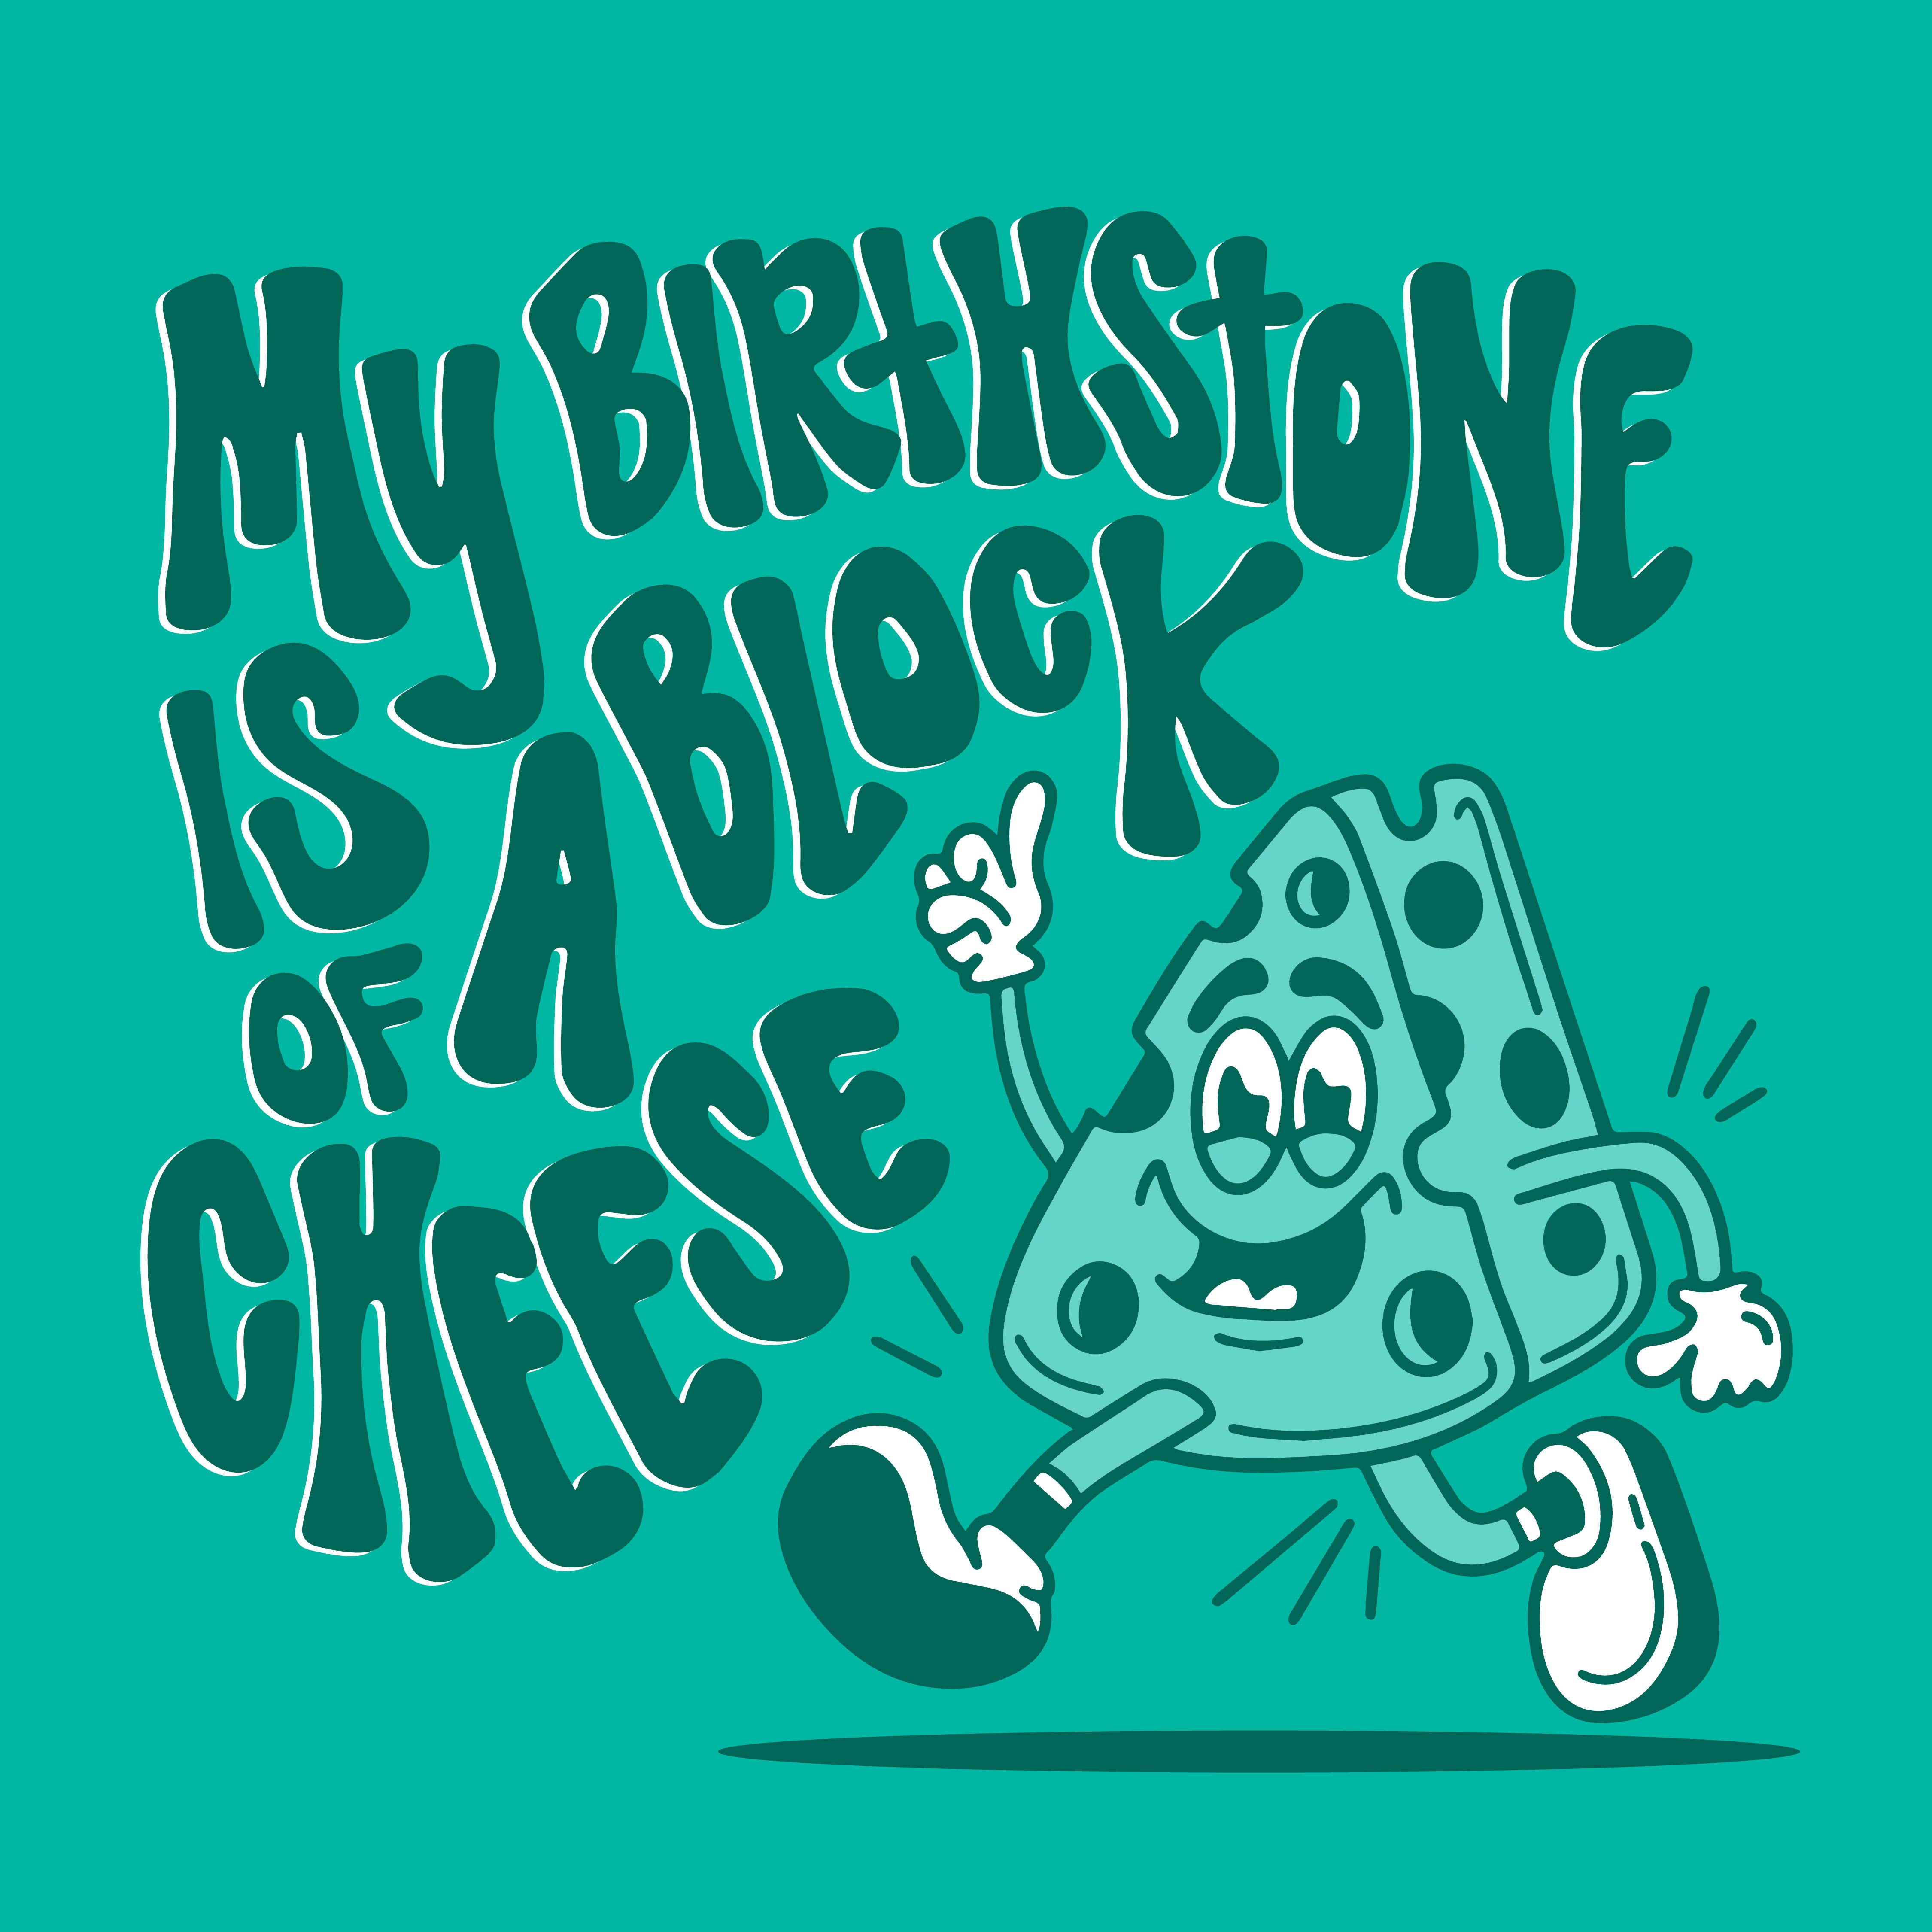 Cheese Please! character design design graphic design hand written type illustration typography